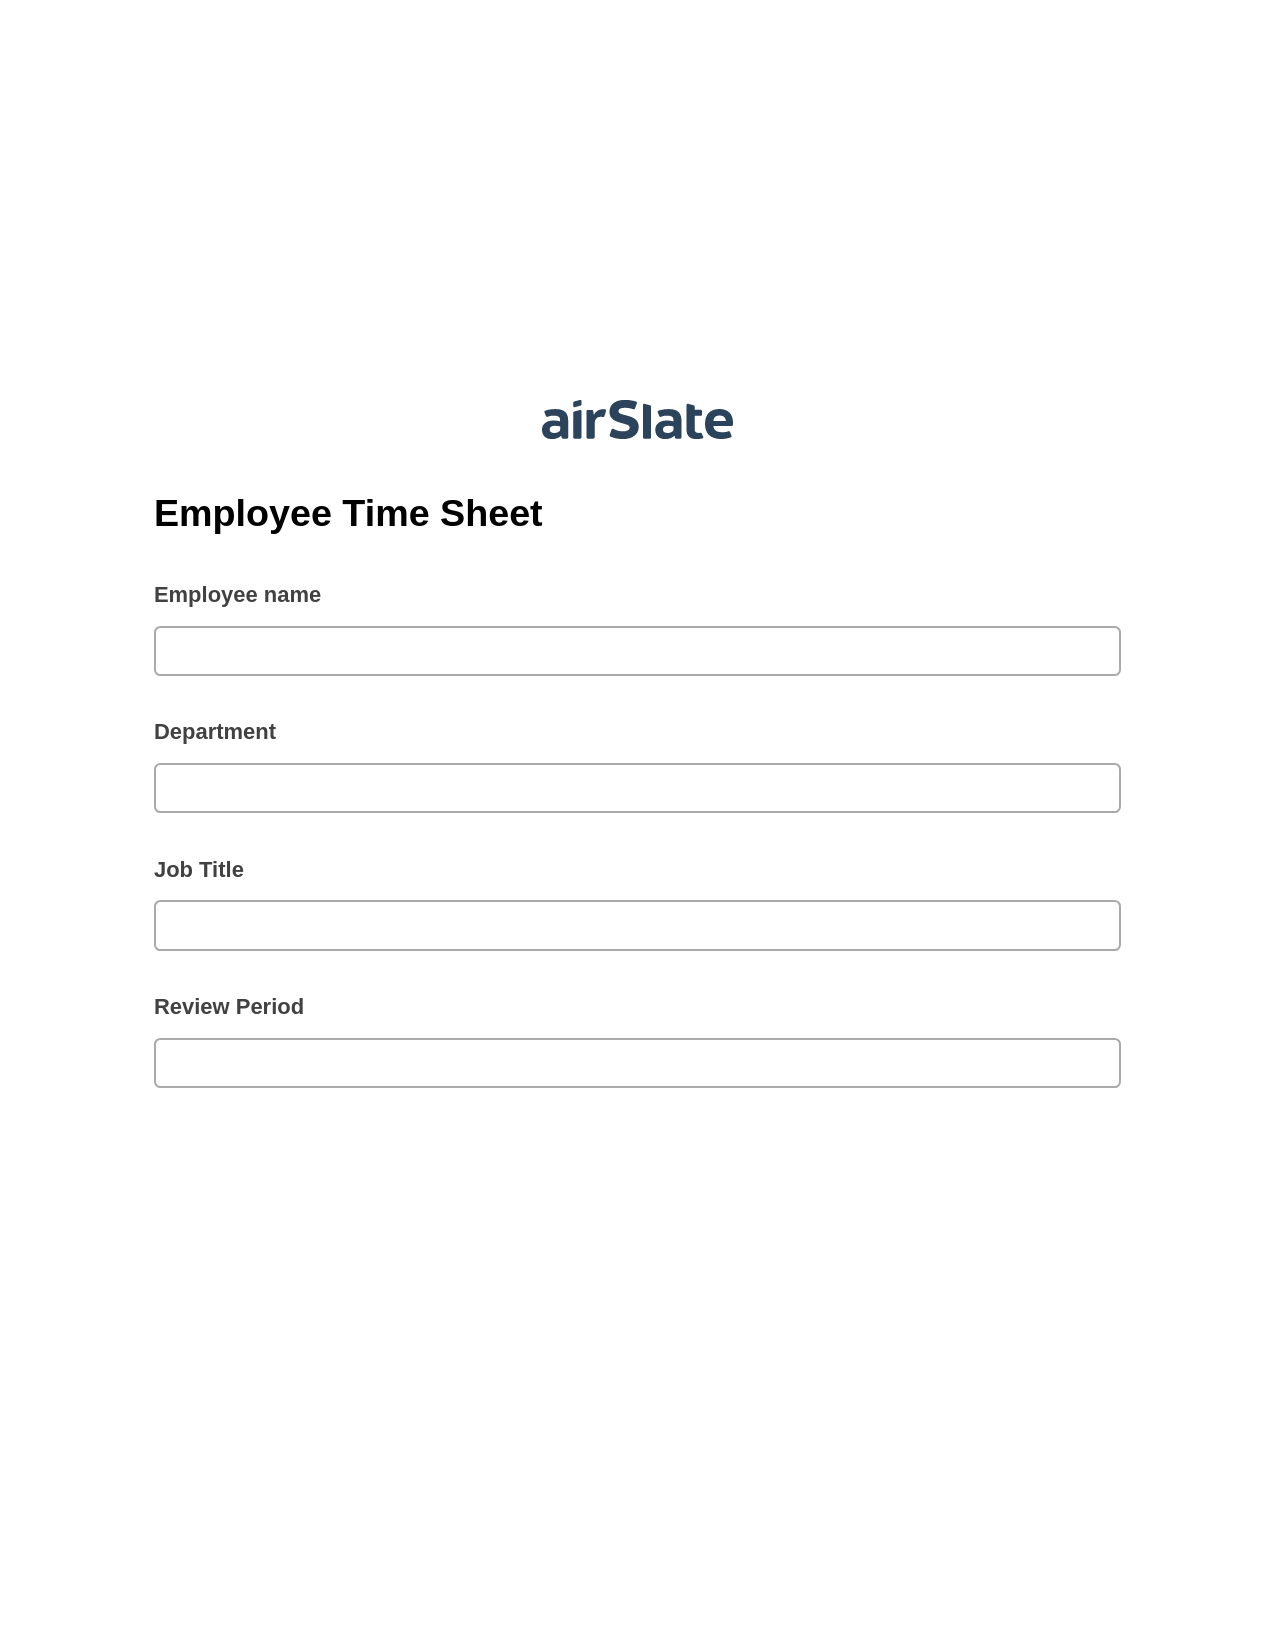 Employee Time Sheet Pre-fill Dropdowns from Airtable, Update Audit Trail Bot, Slack Two-Way Binding Bot